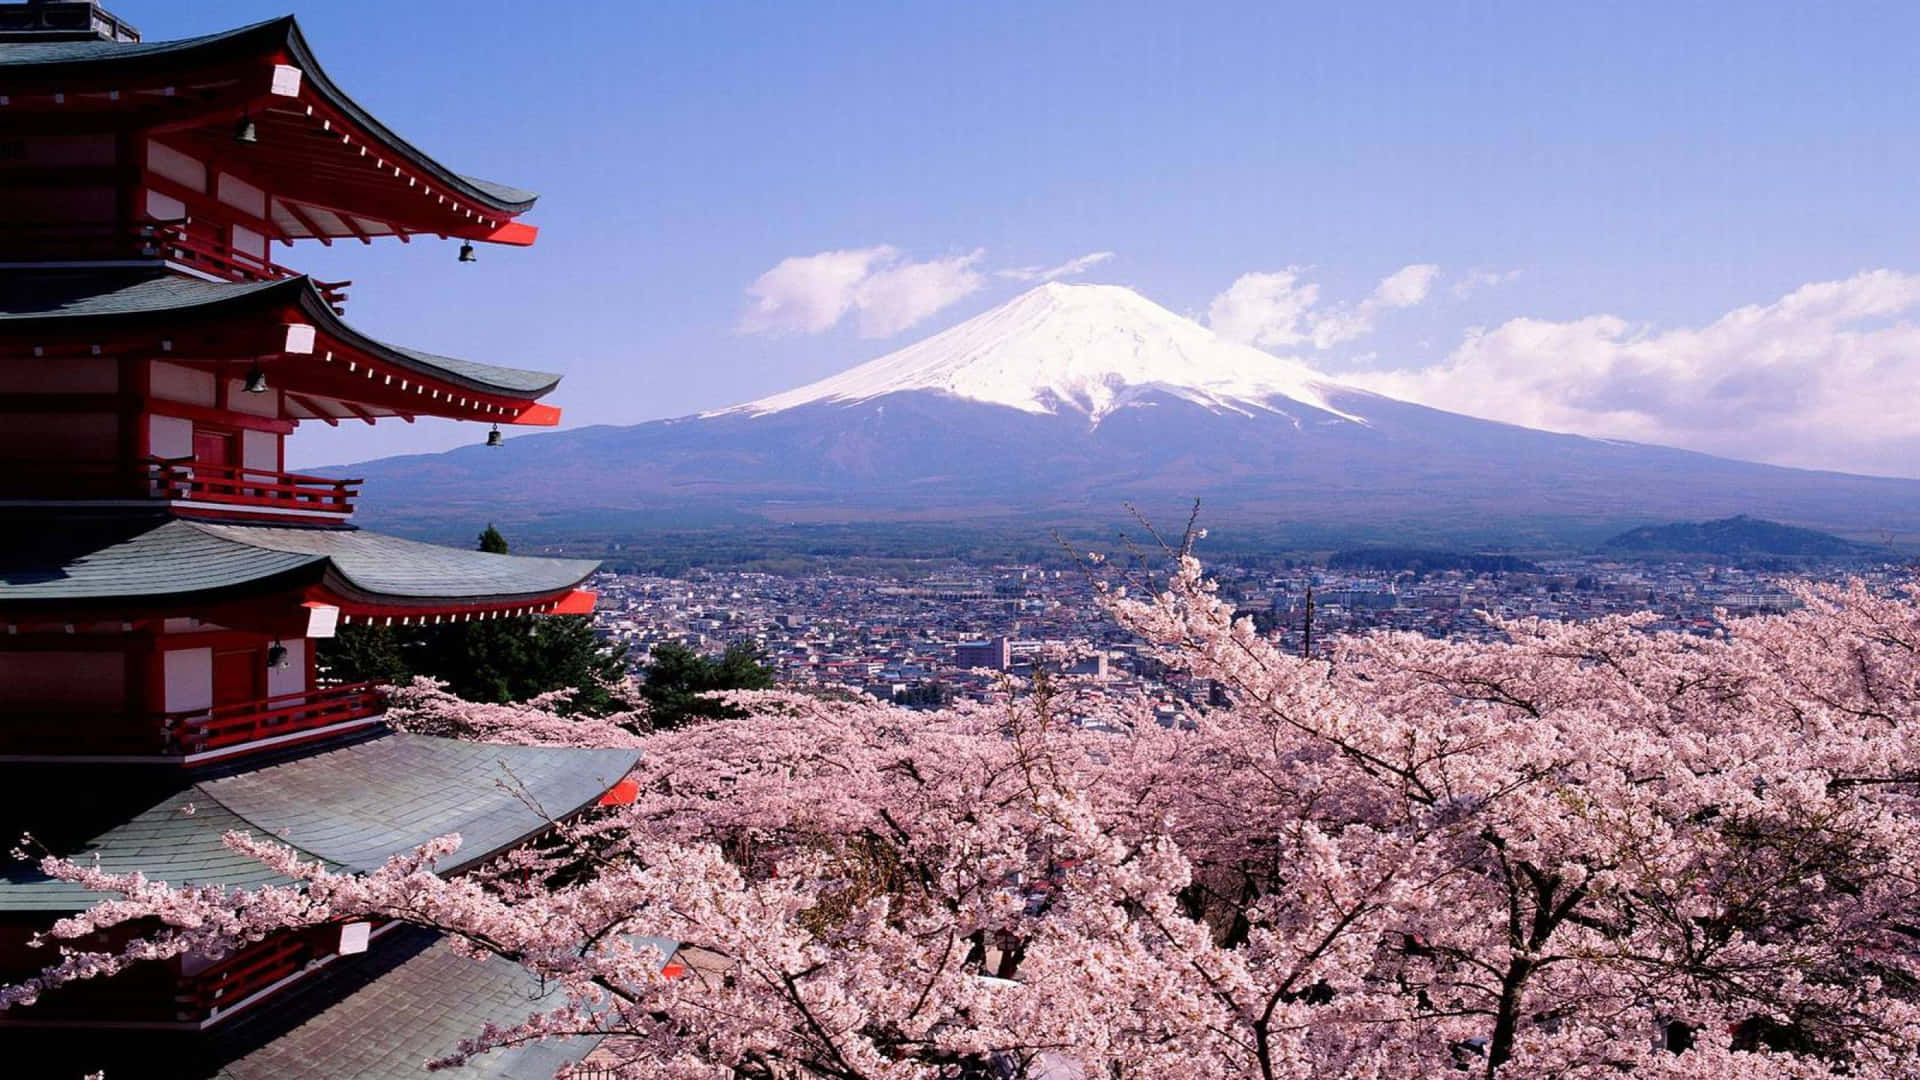 A Pagoda With Cherry Blossoms And A Mountain In The Background